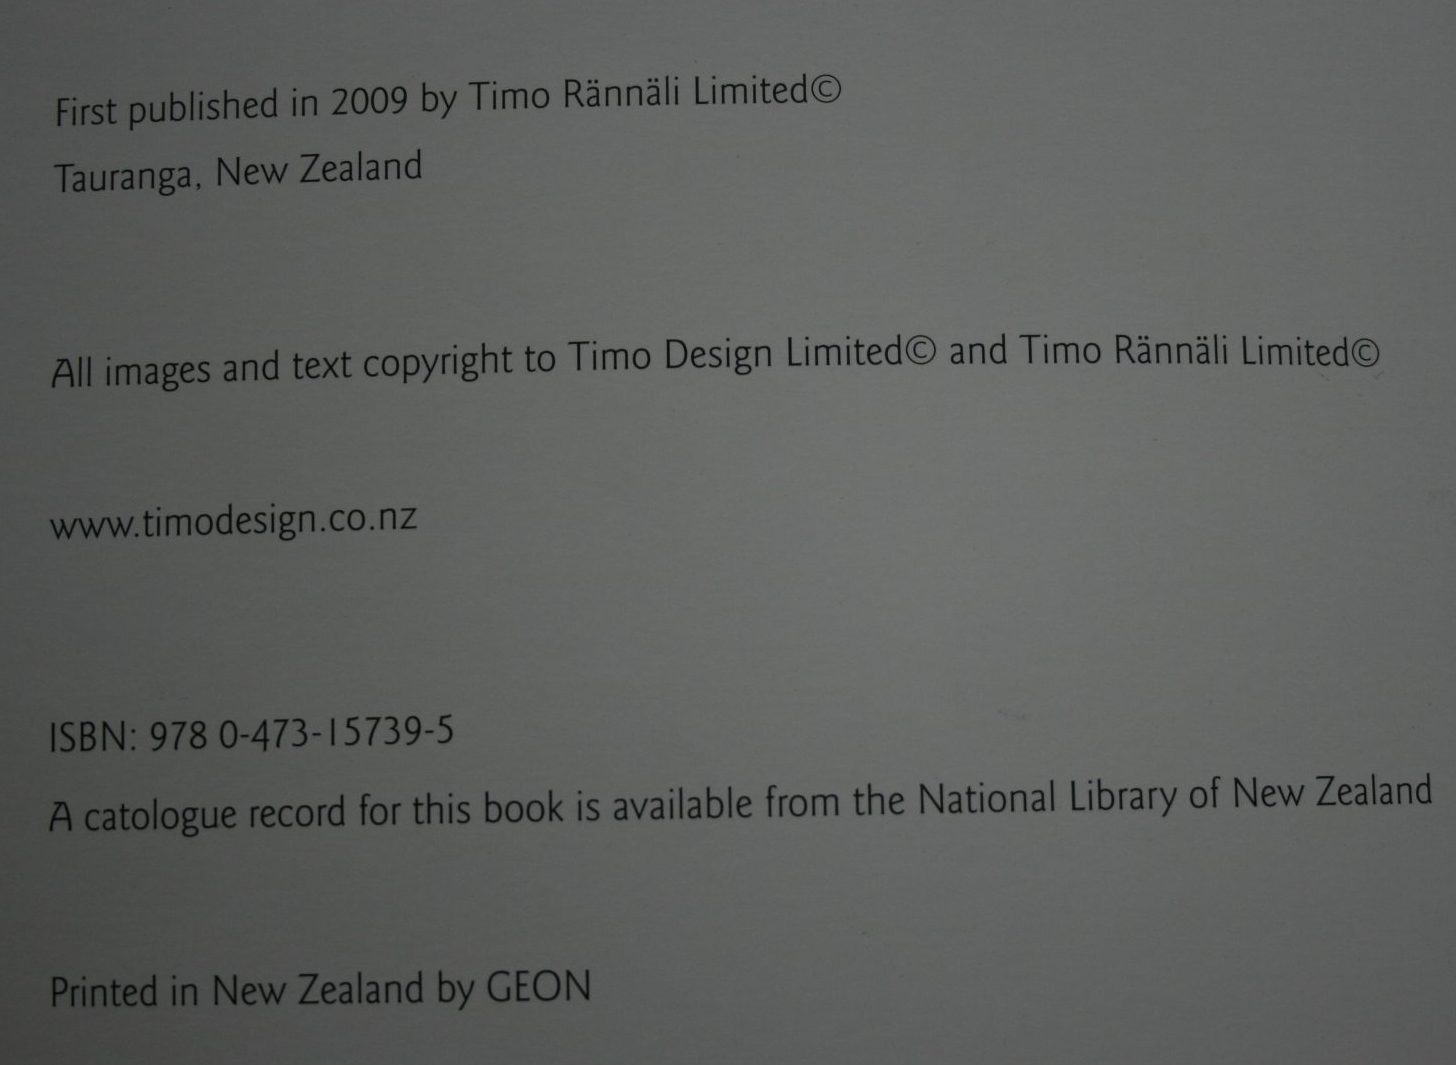 Aotearoa New Zealand A Land to Love By Timo Rannali. SIGNED BY AUTHOR/ARTIST. VERY SCARCE SIGNED COPY.